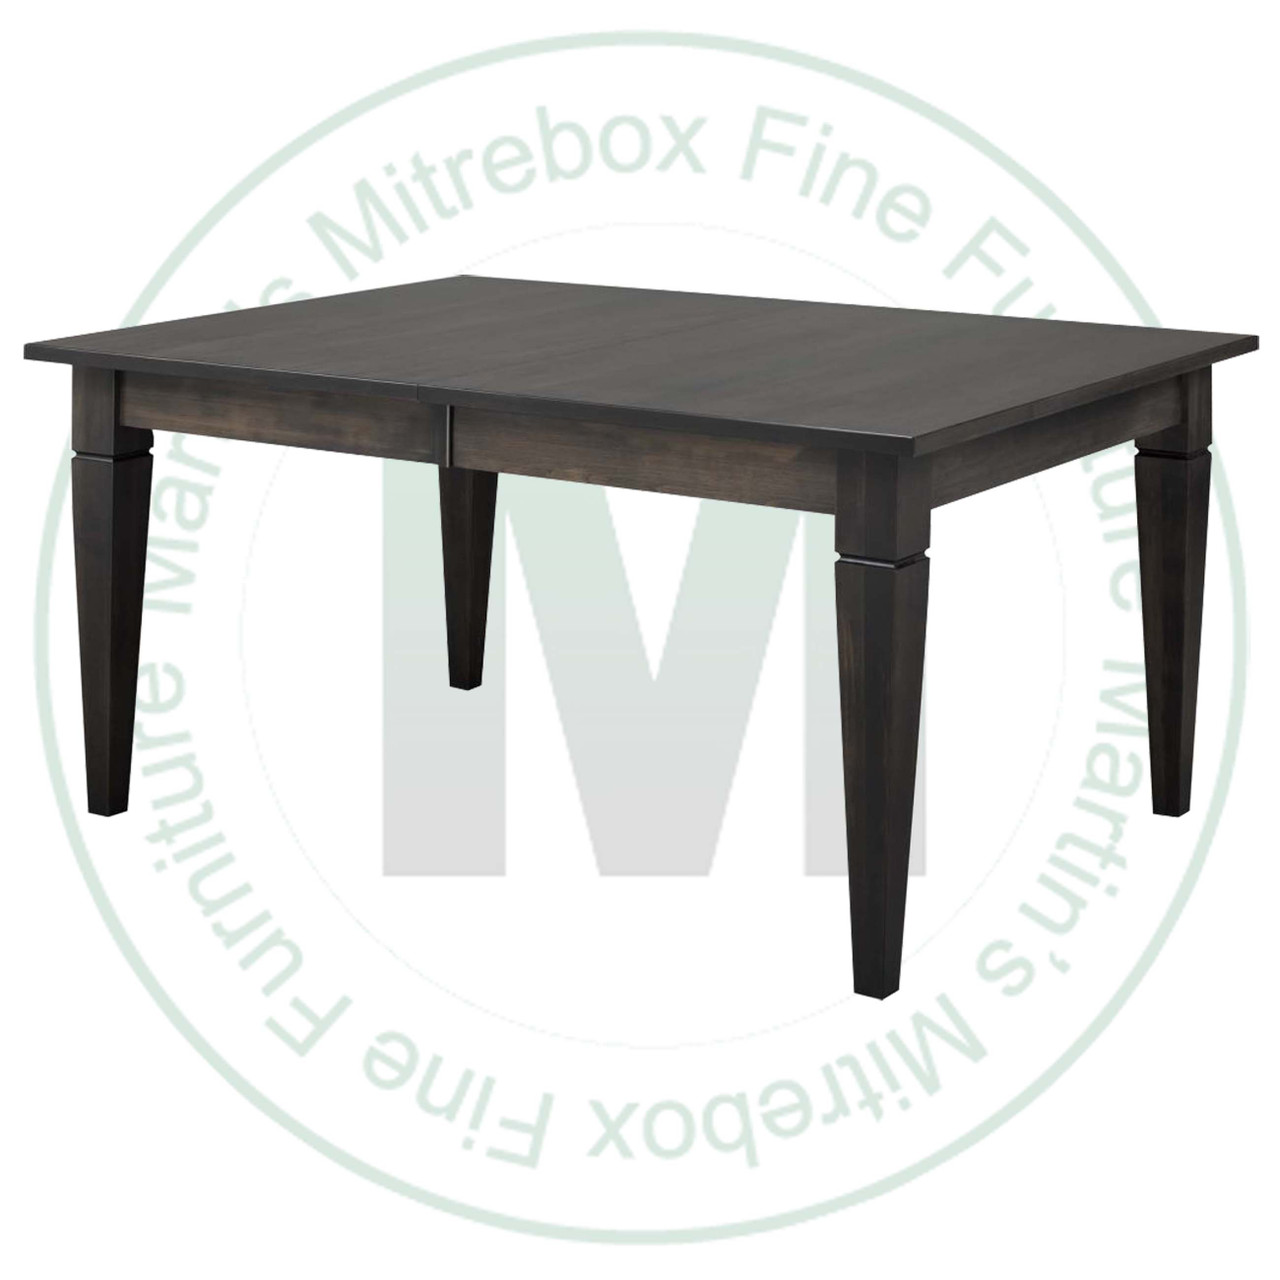 Maple Reesor Solid Top Harvest Table 48''D x 60''W x 30''H Table Has 1 3/4'' Thick Top And 2 - 16'' Extensions